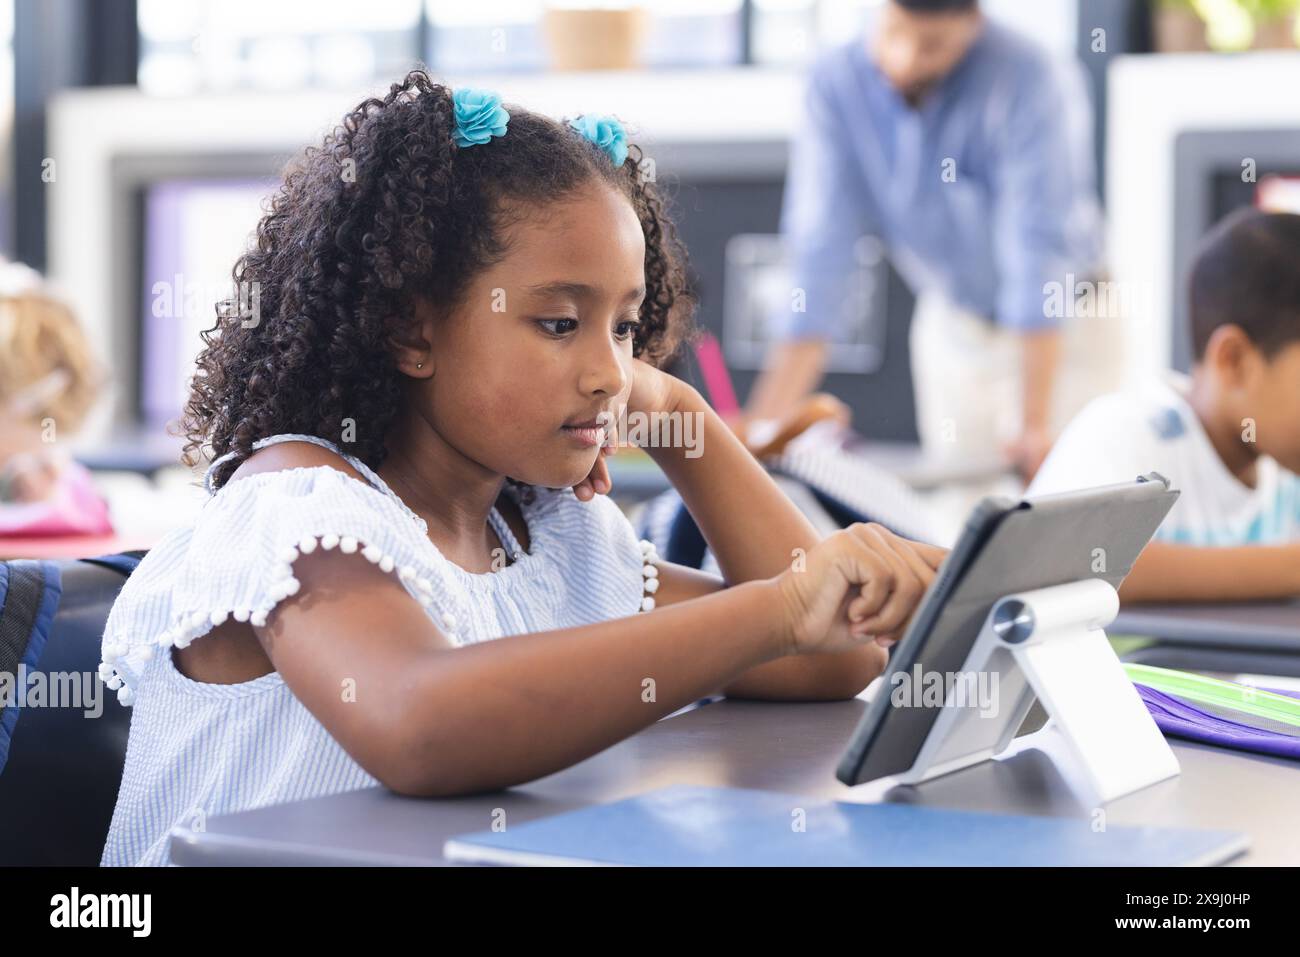 In school, in the classroom, a young biracial girl with curly hair is using a tablet Stock Photo